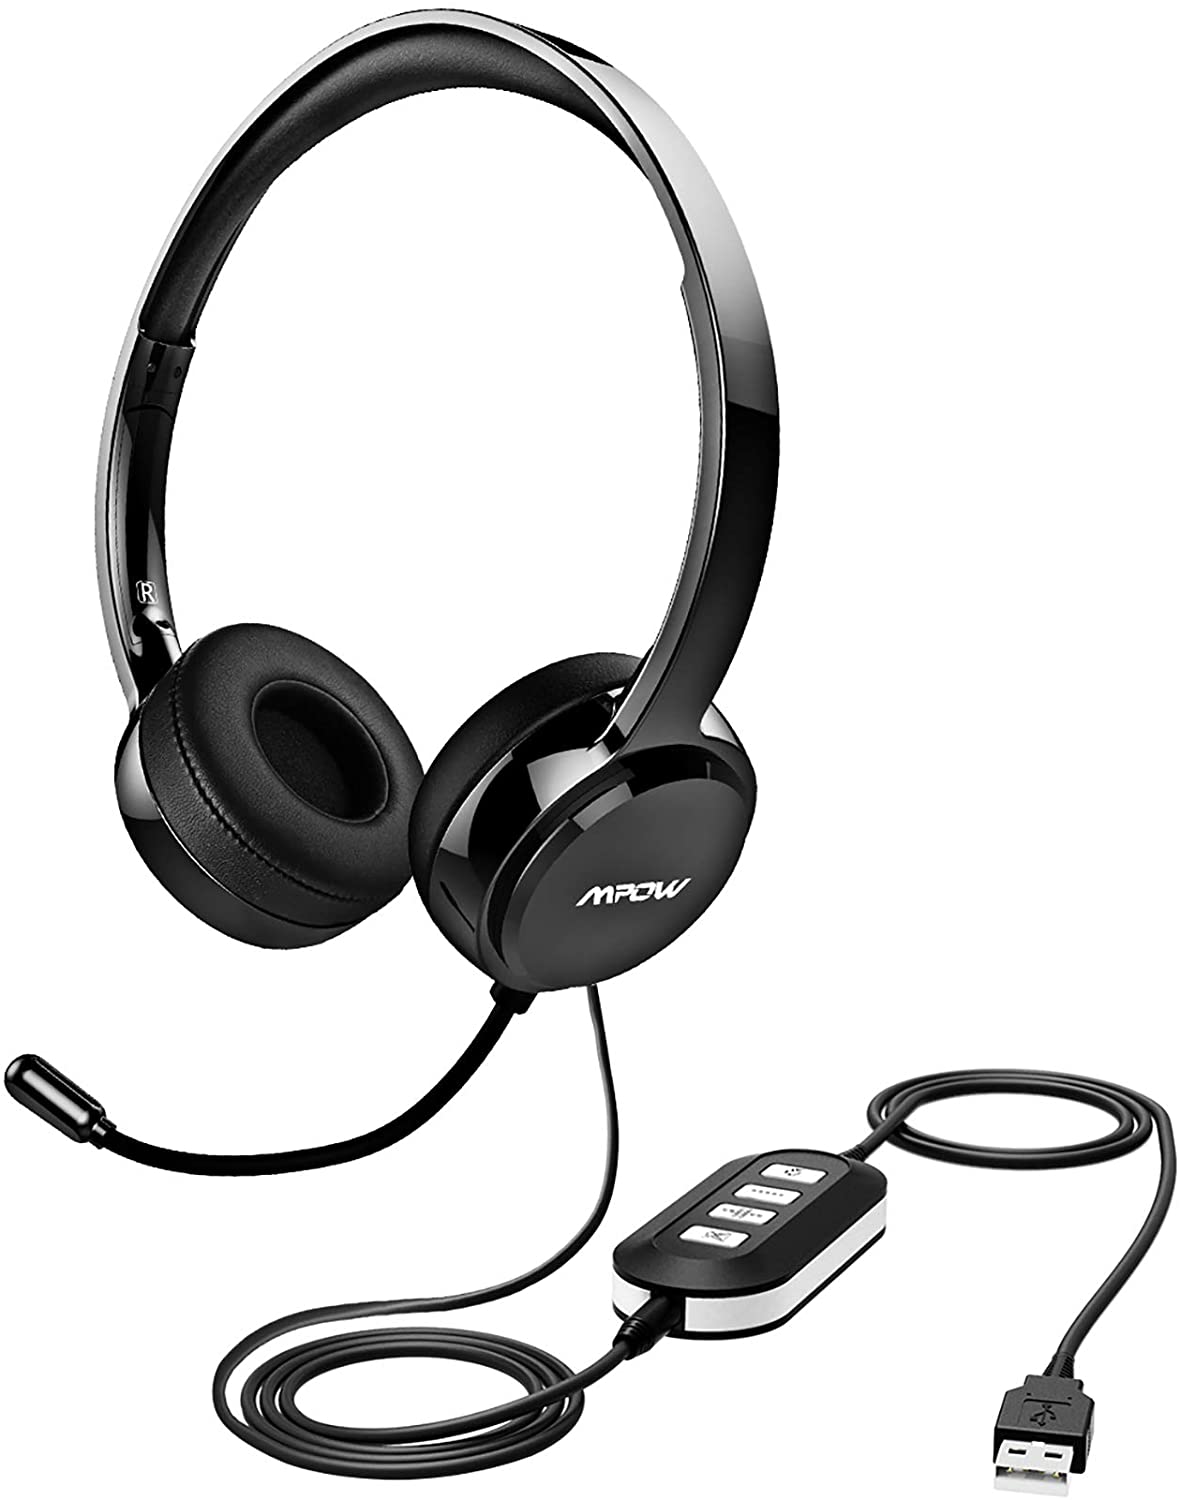 MPOW T071 Business Headset User Manual